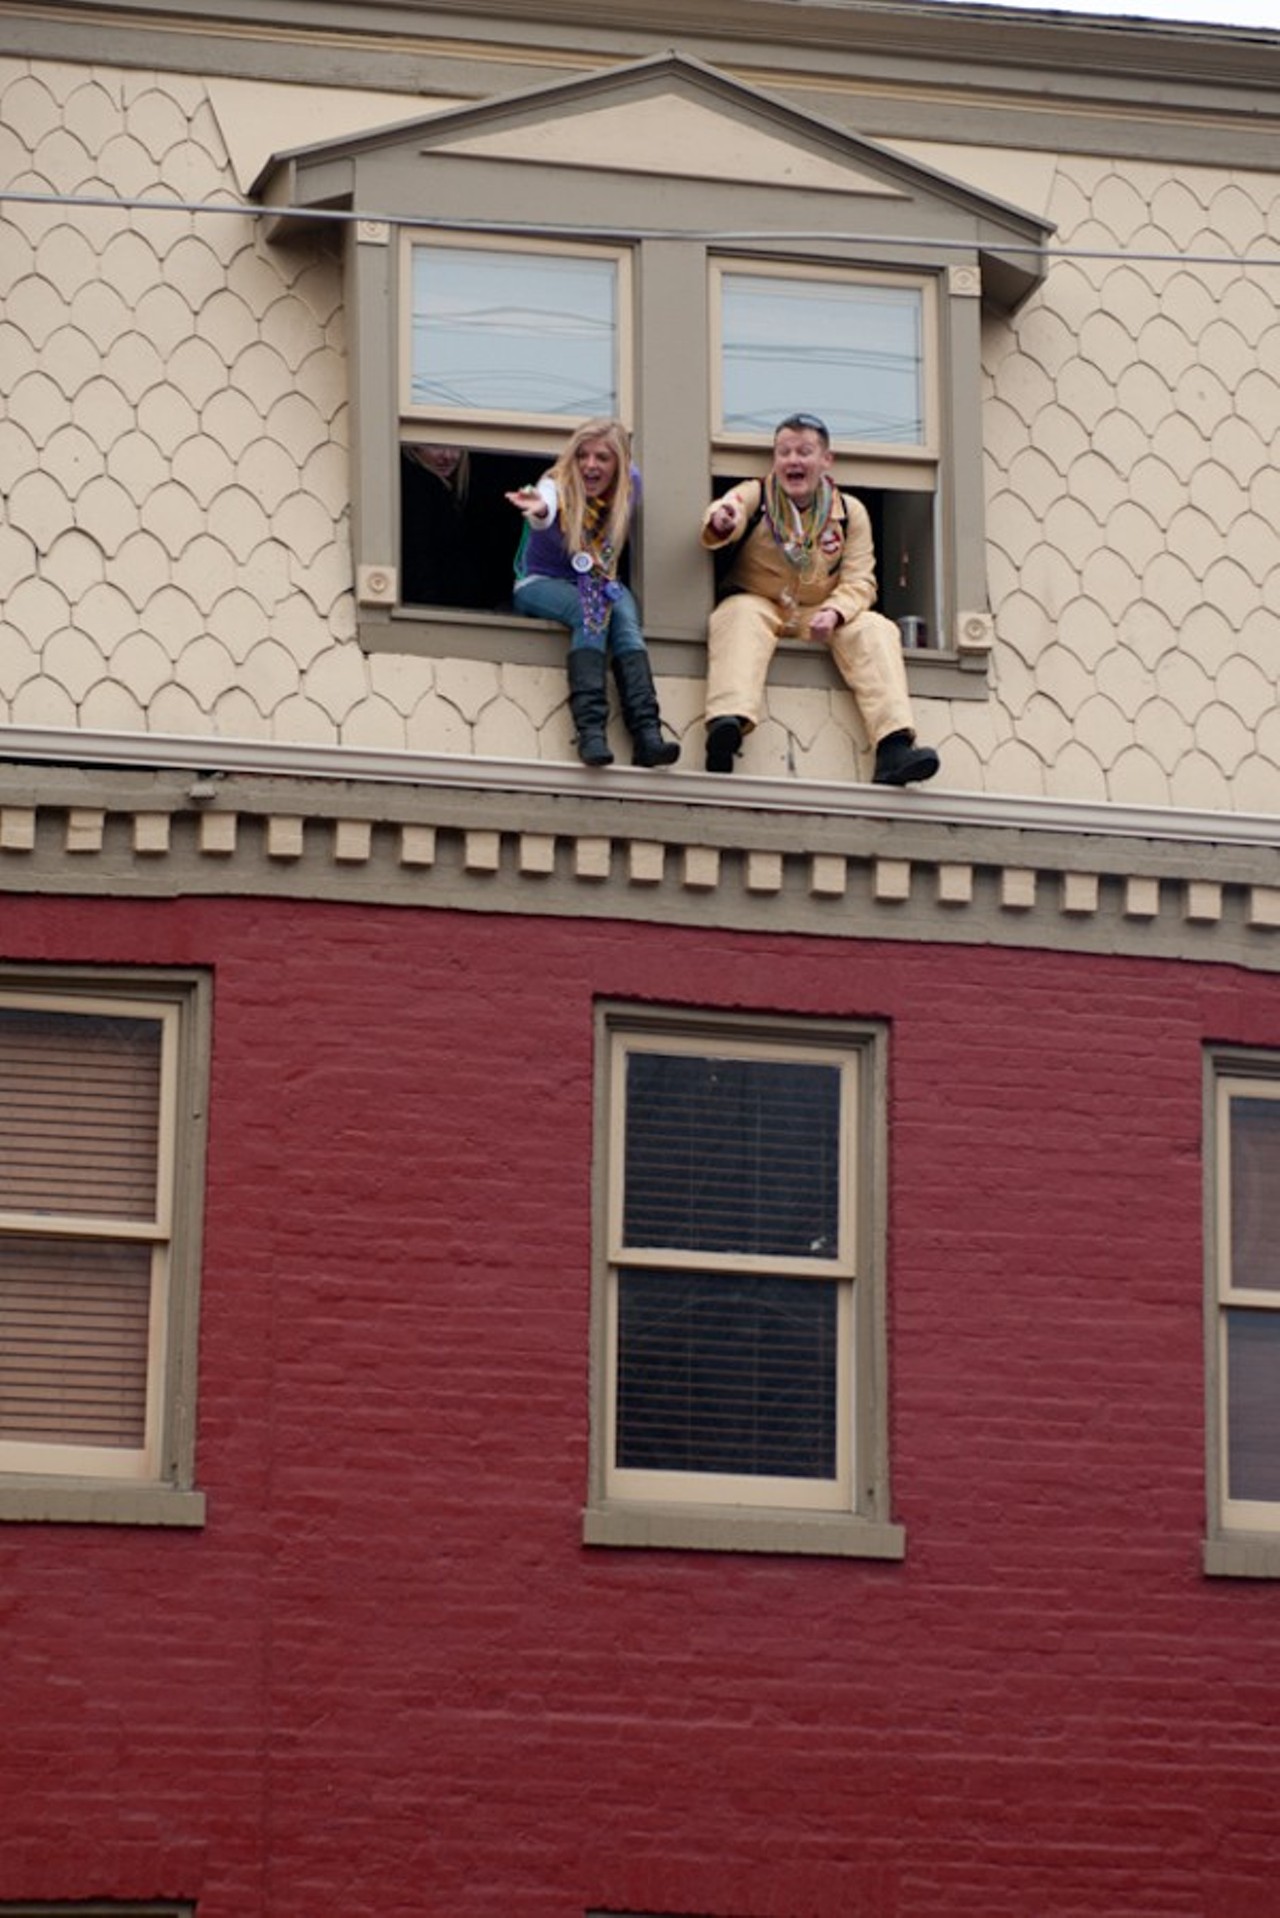 Window partiers. Sitting on the edge of window sills has to be against some sort of safety regulation, but whatev.